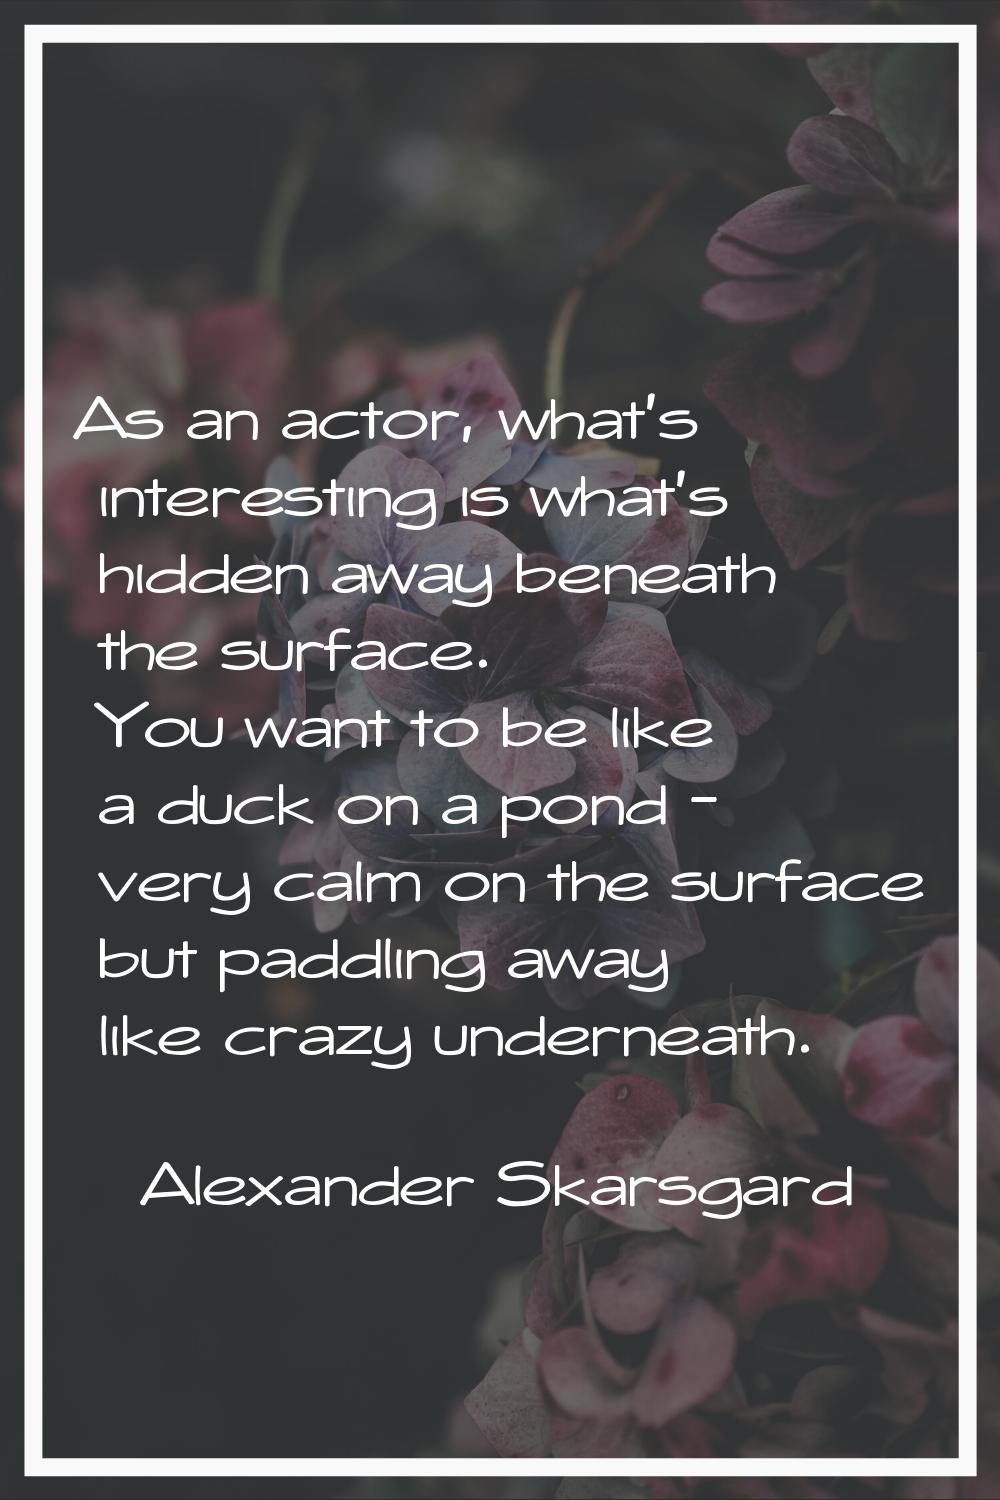 As an actor, what's interesting is what's hidden away beneath the surface. You want to be like a du